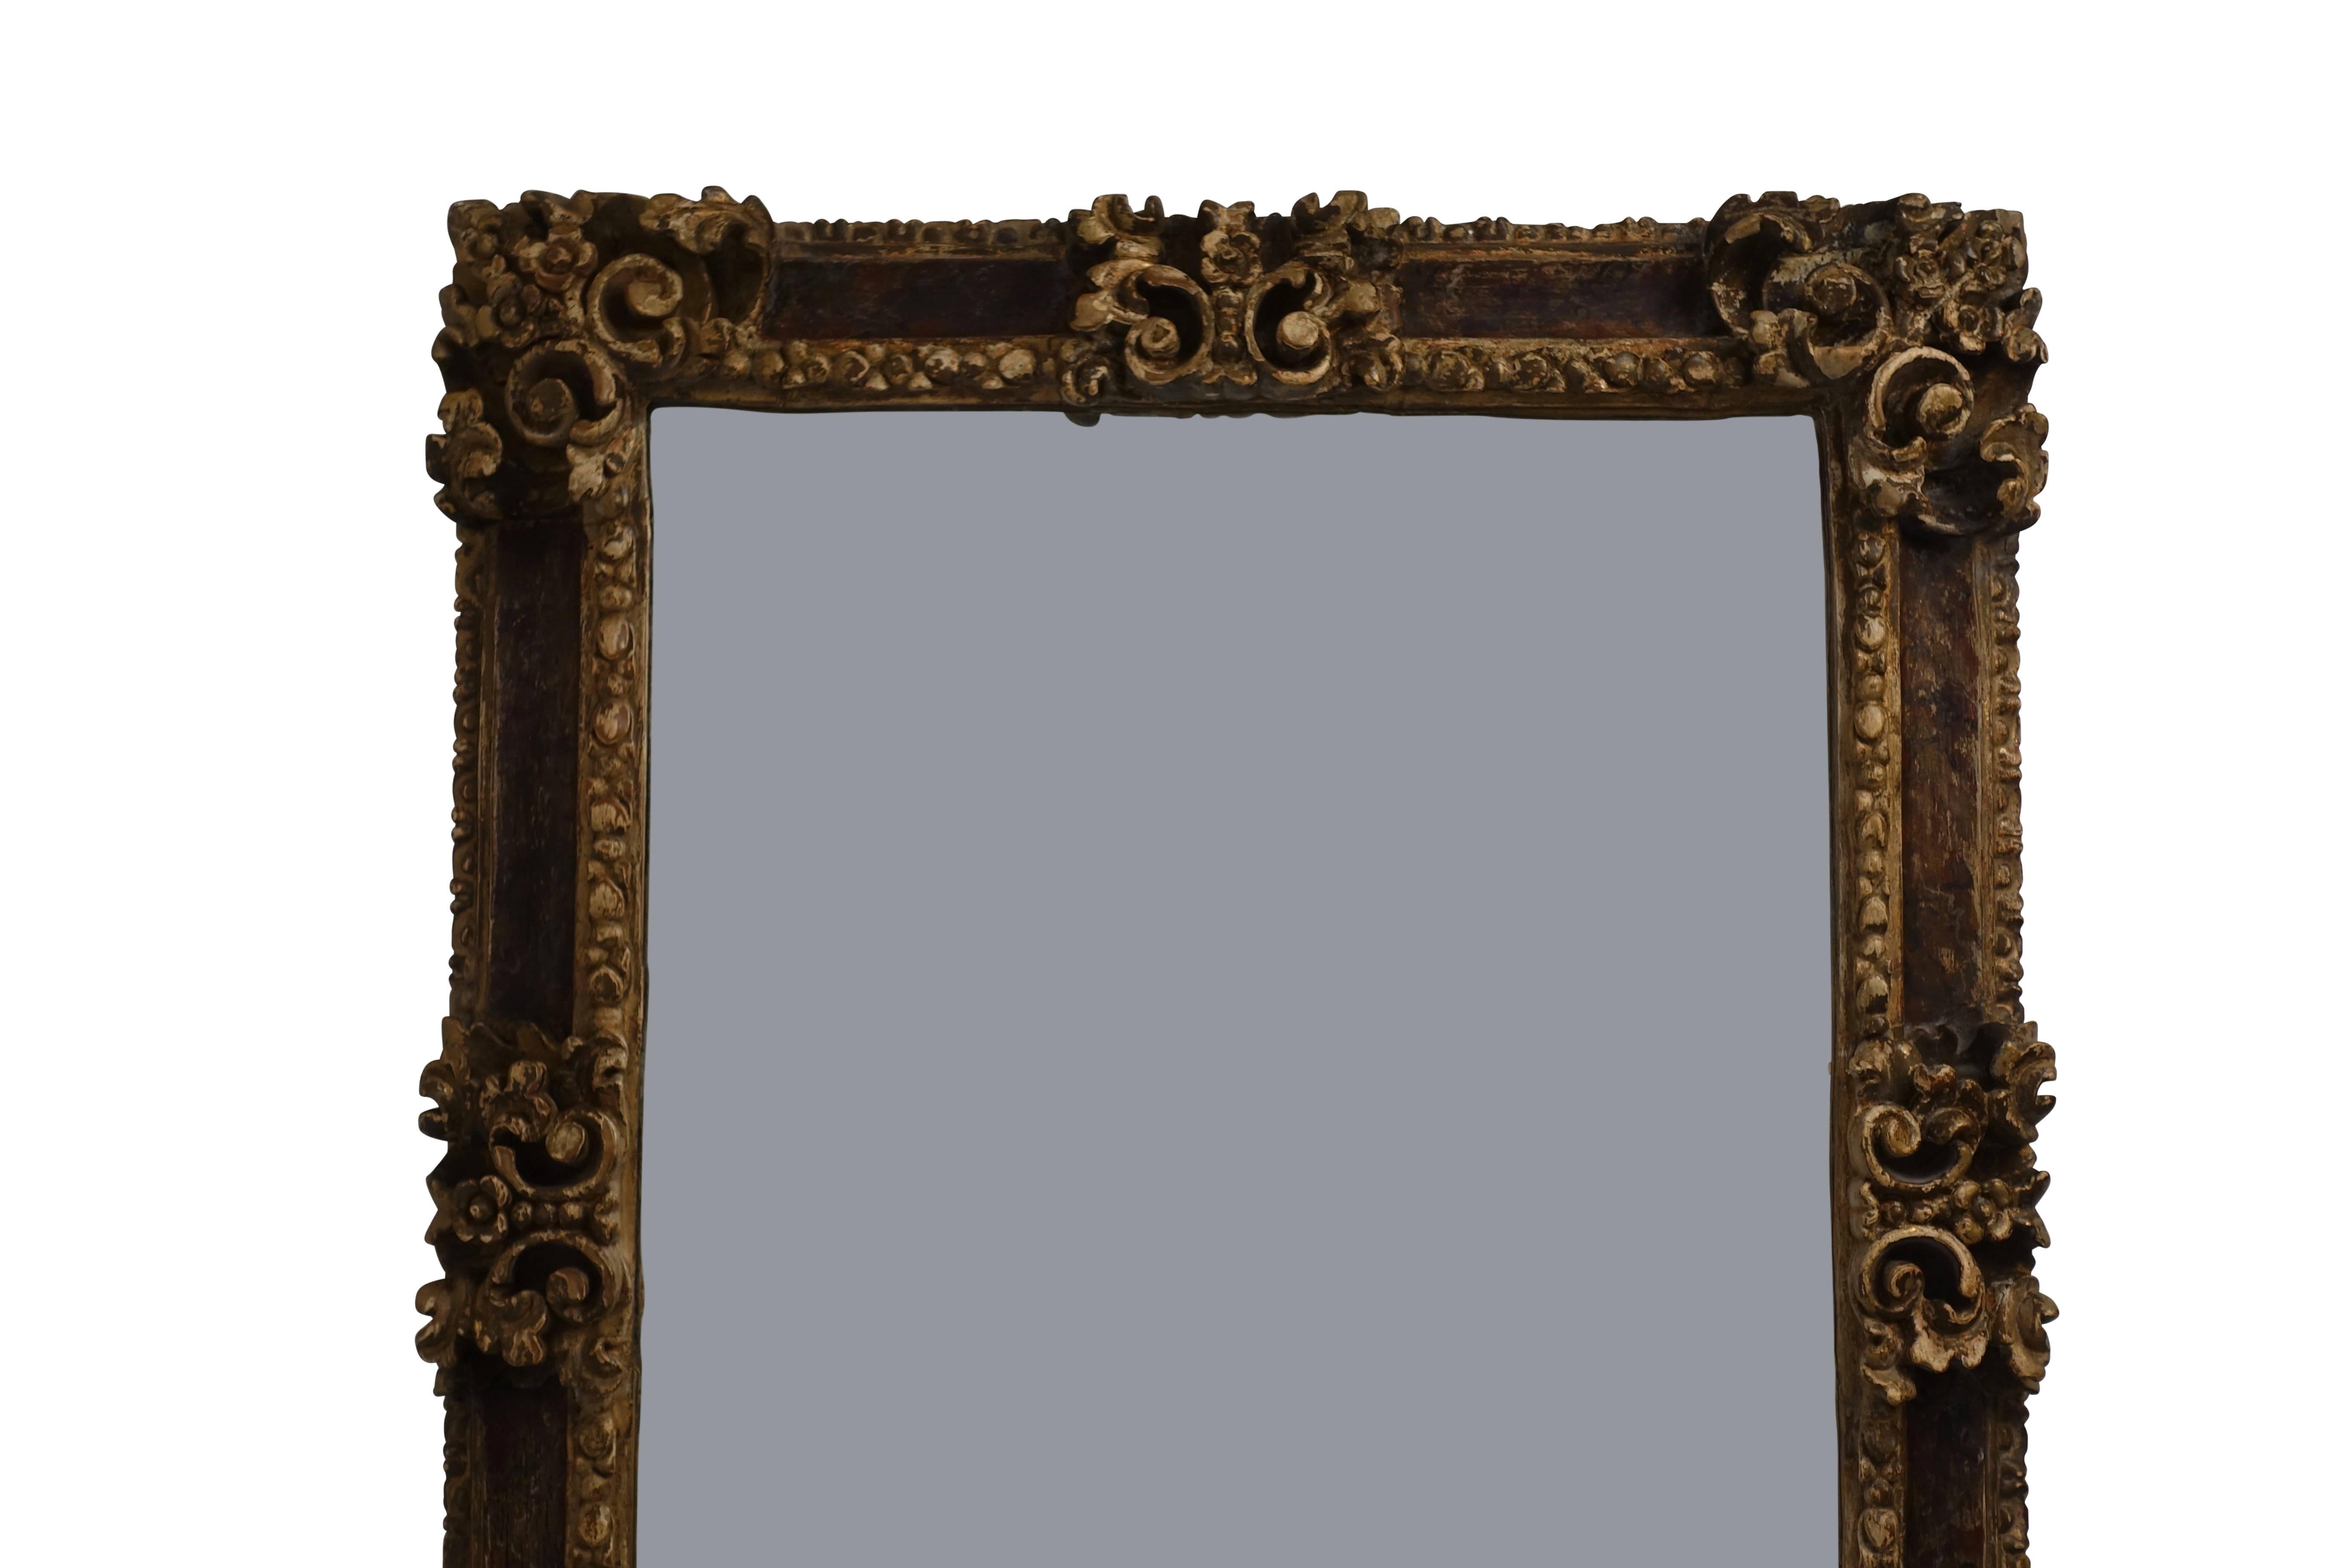 An early 19th century Spanish colonial carved, parcel-gilt and faux painted frame with newer mirror plate.